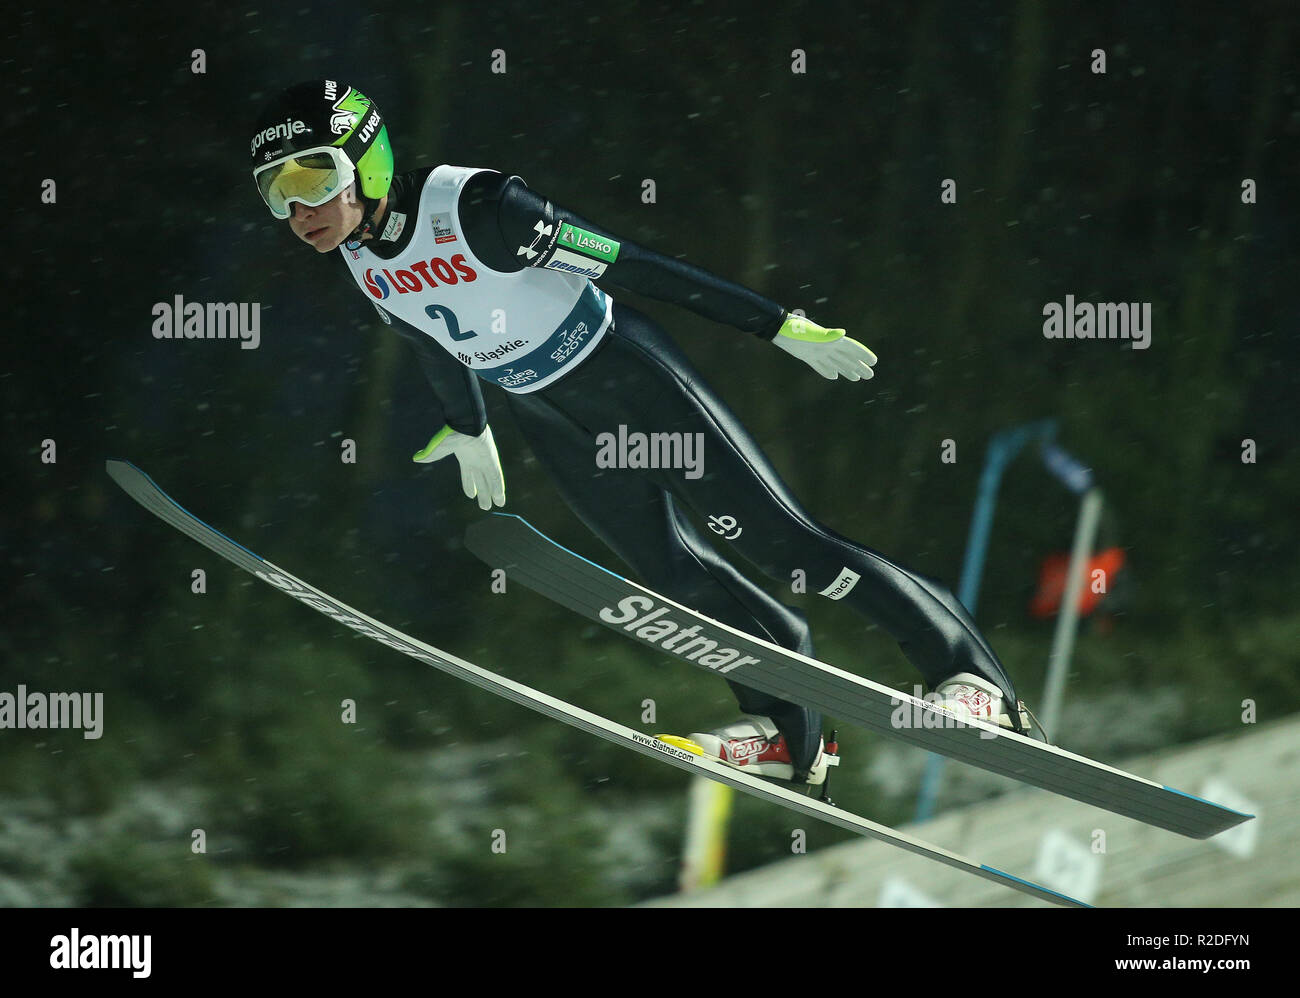 Anze Lanisek seen in action during the individual competition of the FIS Ski Jumping World Cup in Wisla. Stock Photo